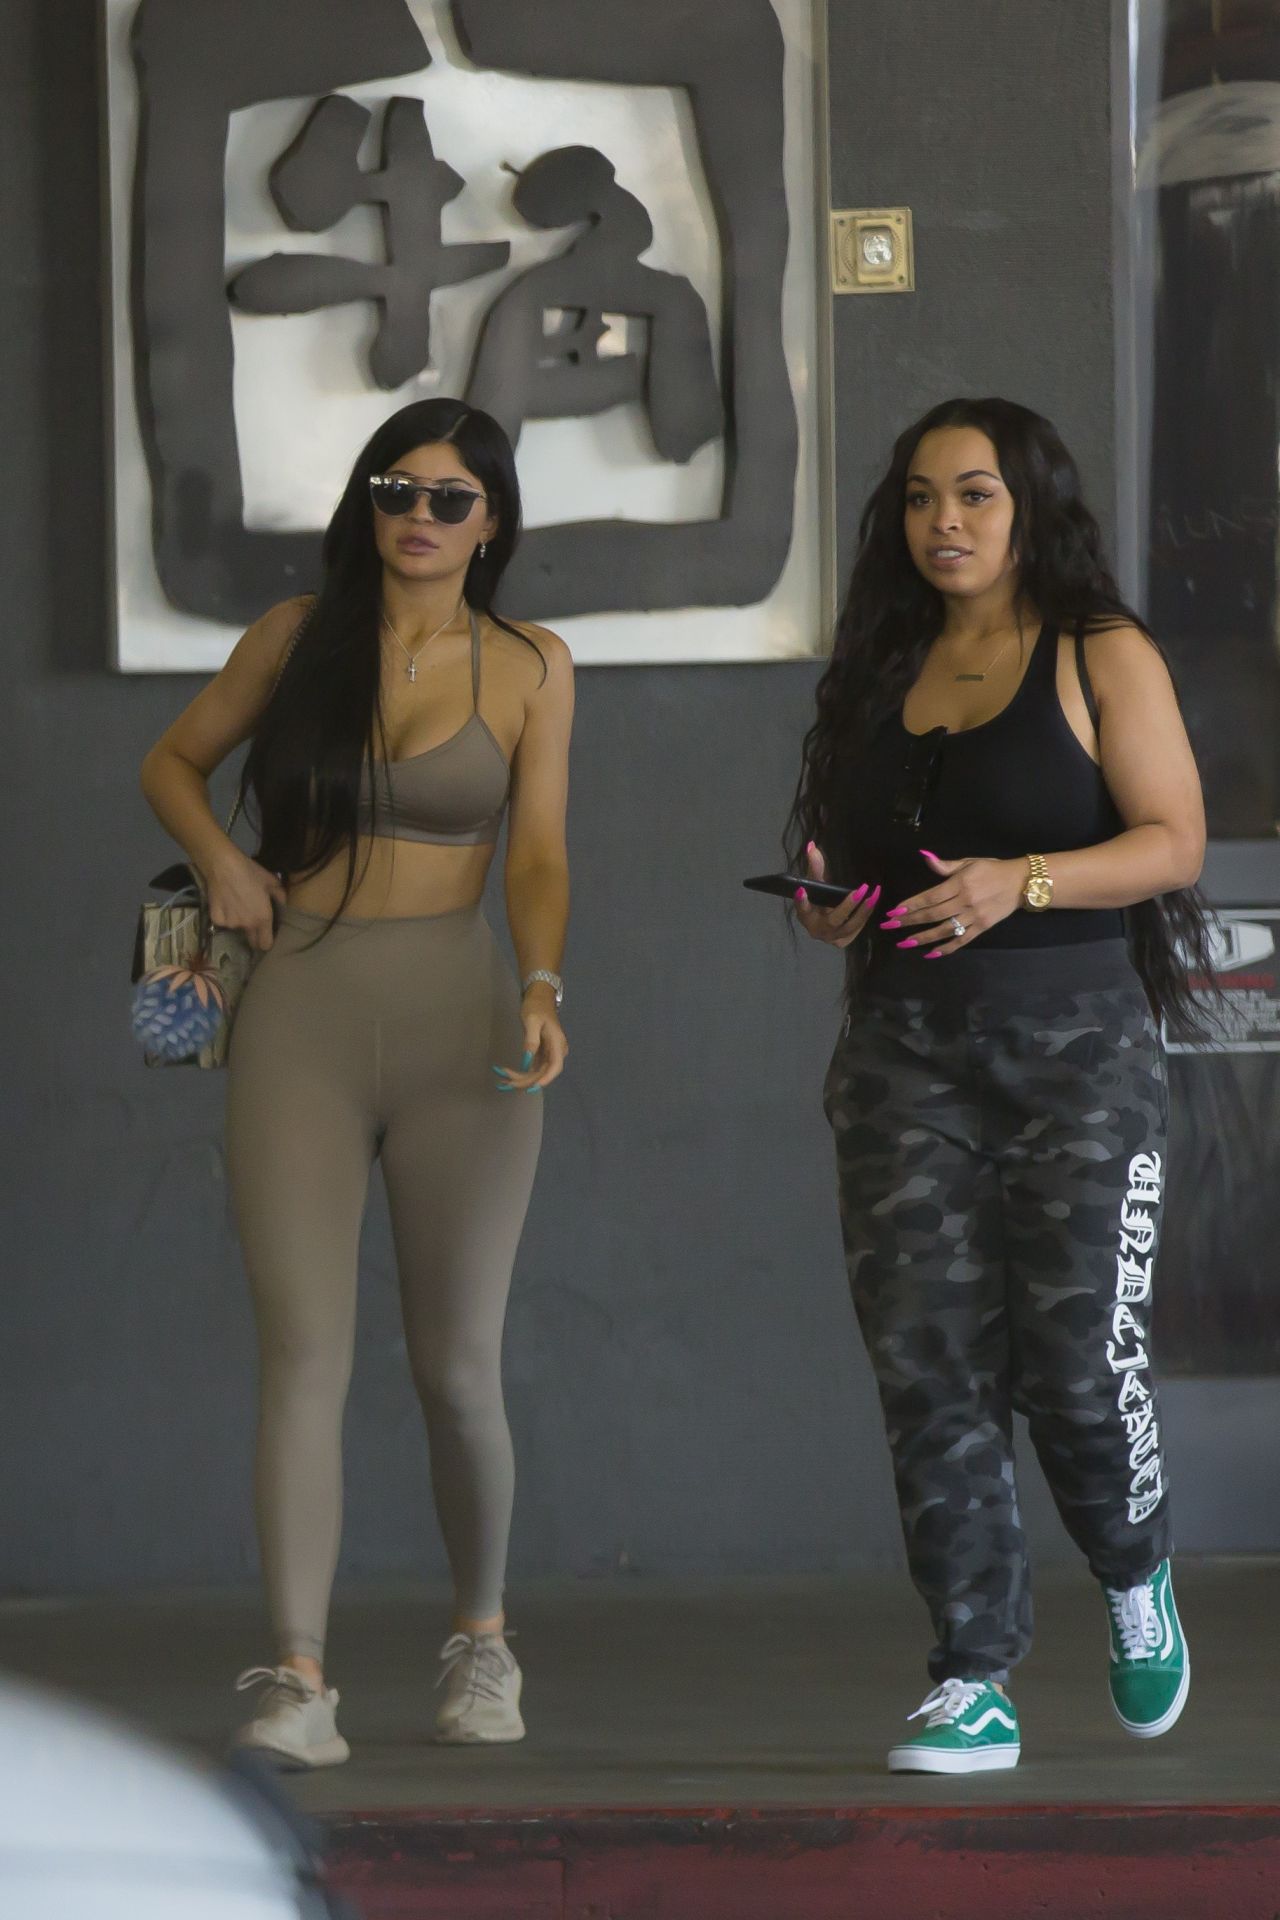 Kylie Jenner goes shopping at the Topanga Canyon Mall in Canoga